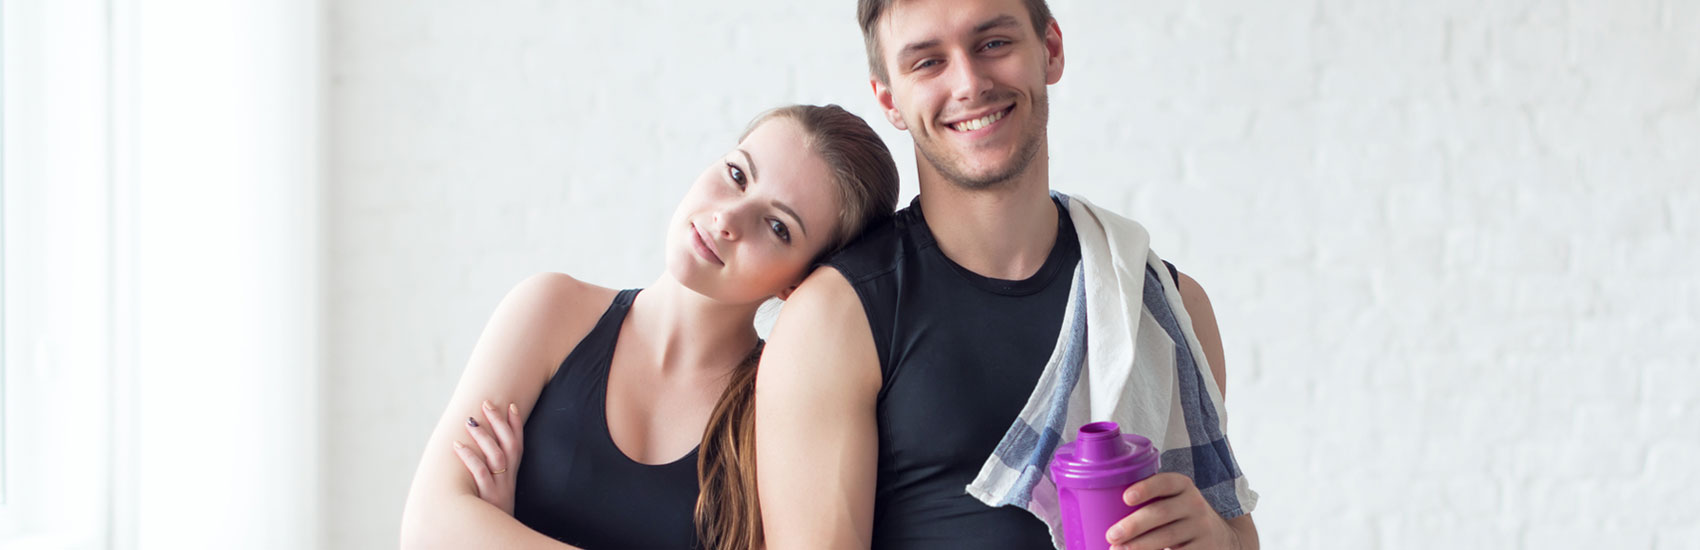 Protein Shakes- Couple Fitness